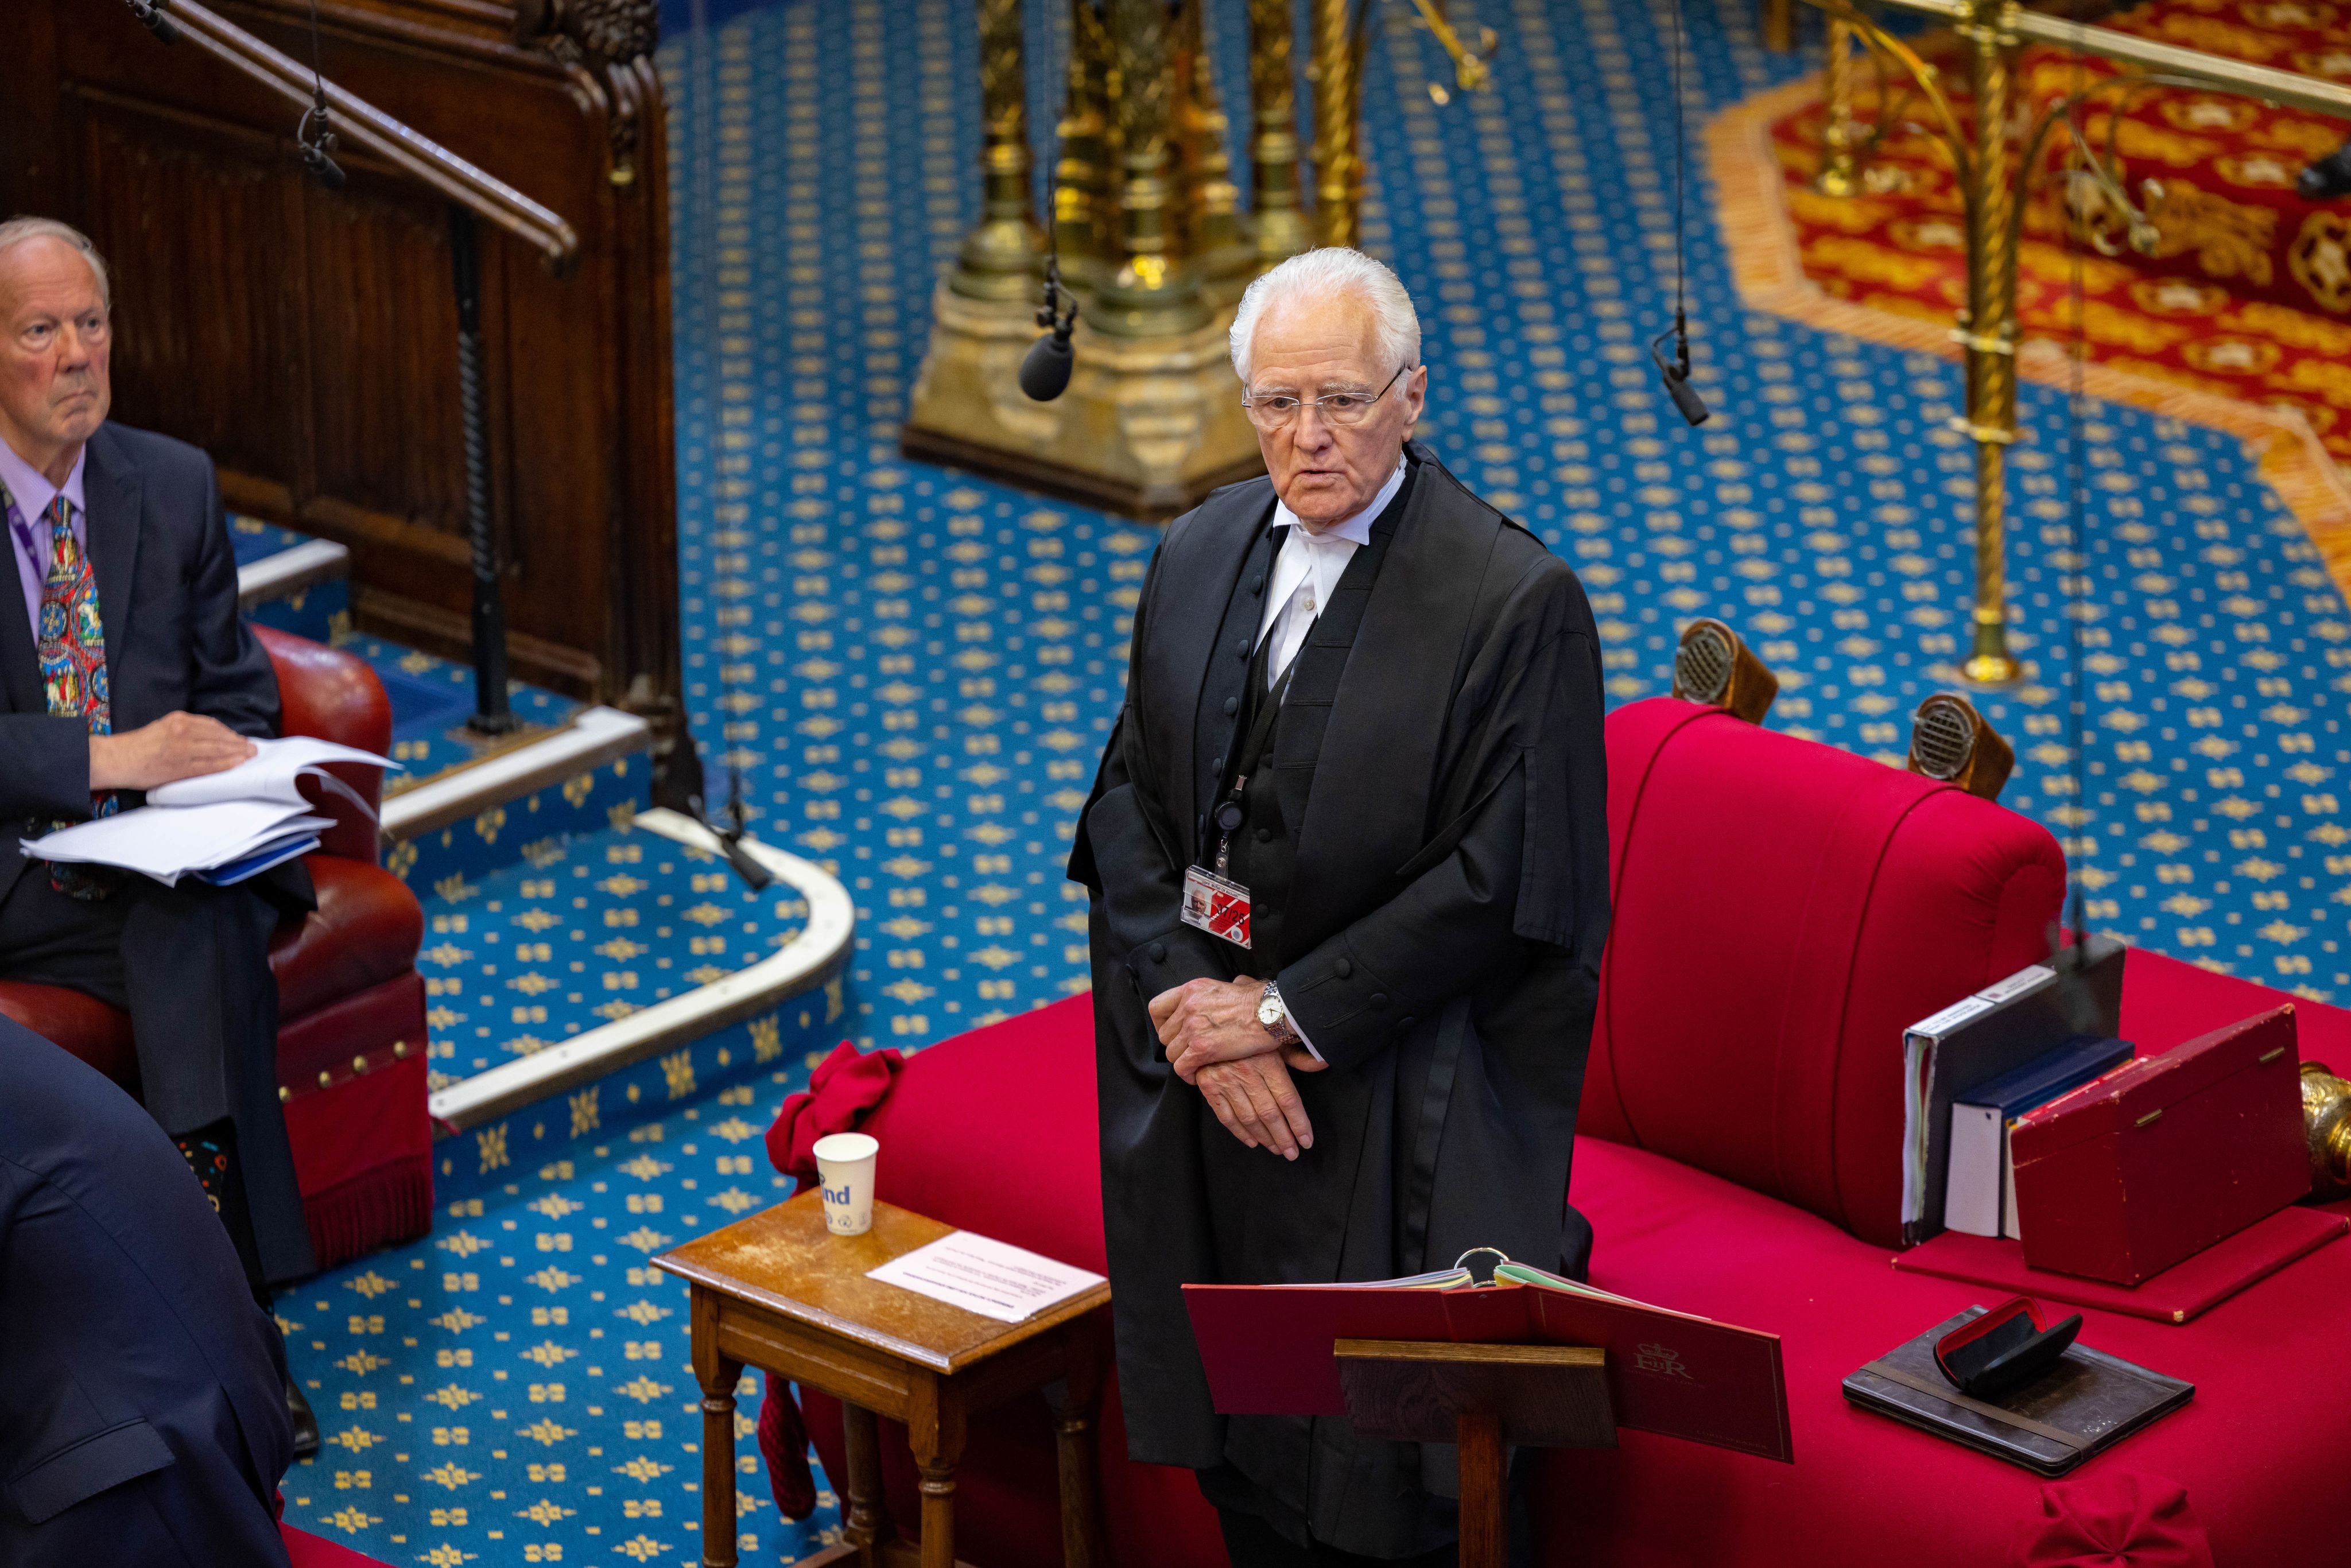 The Lord Speaker stands to speak from the woolsack in the House of Lords chamber